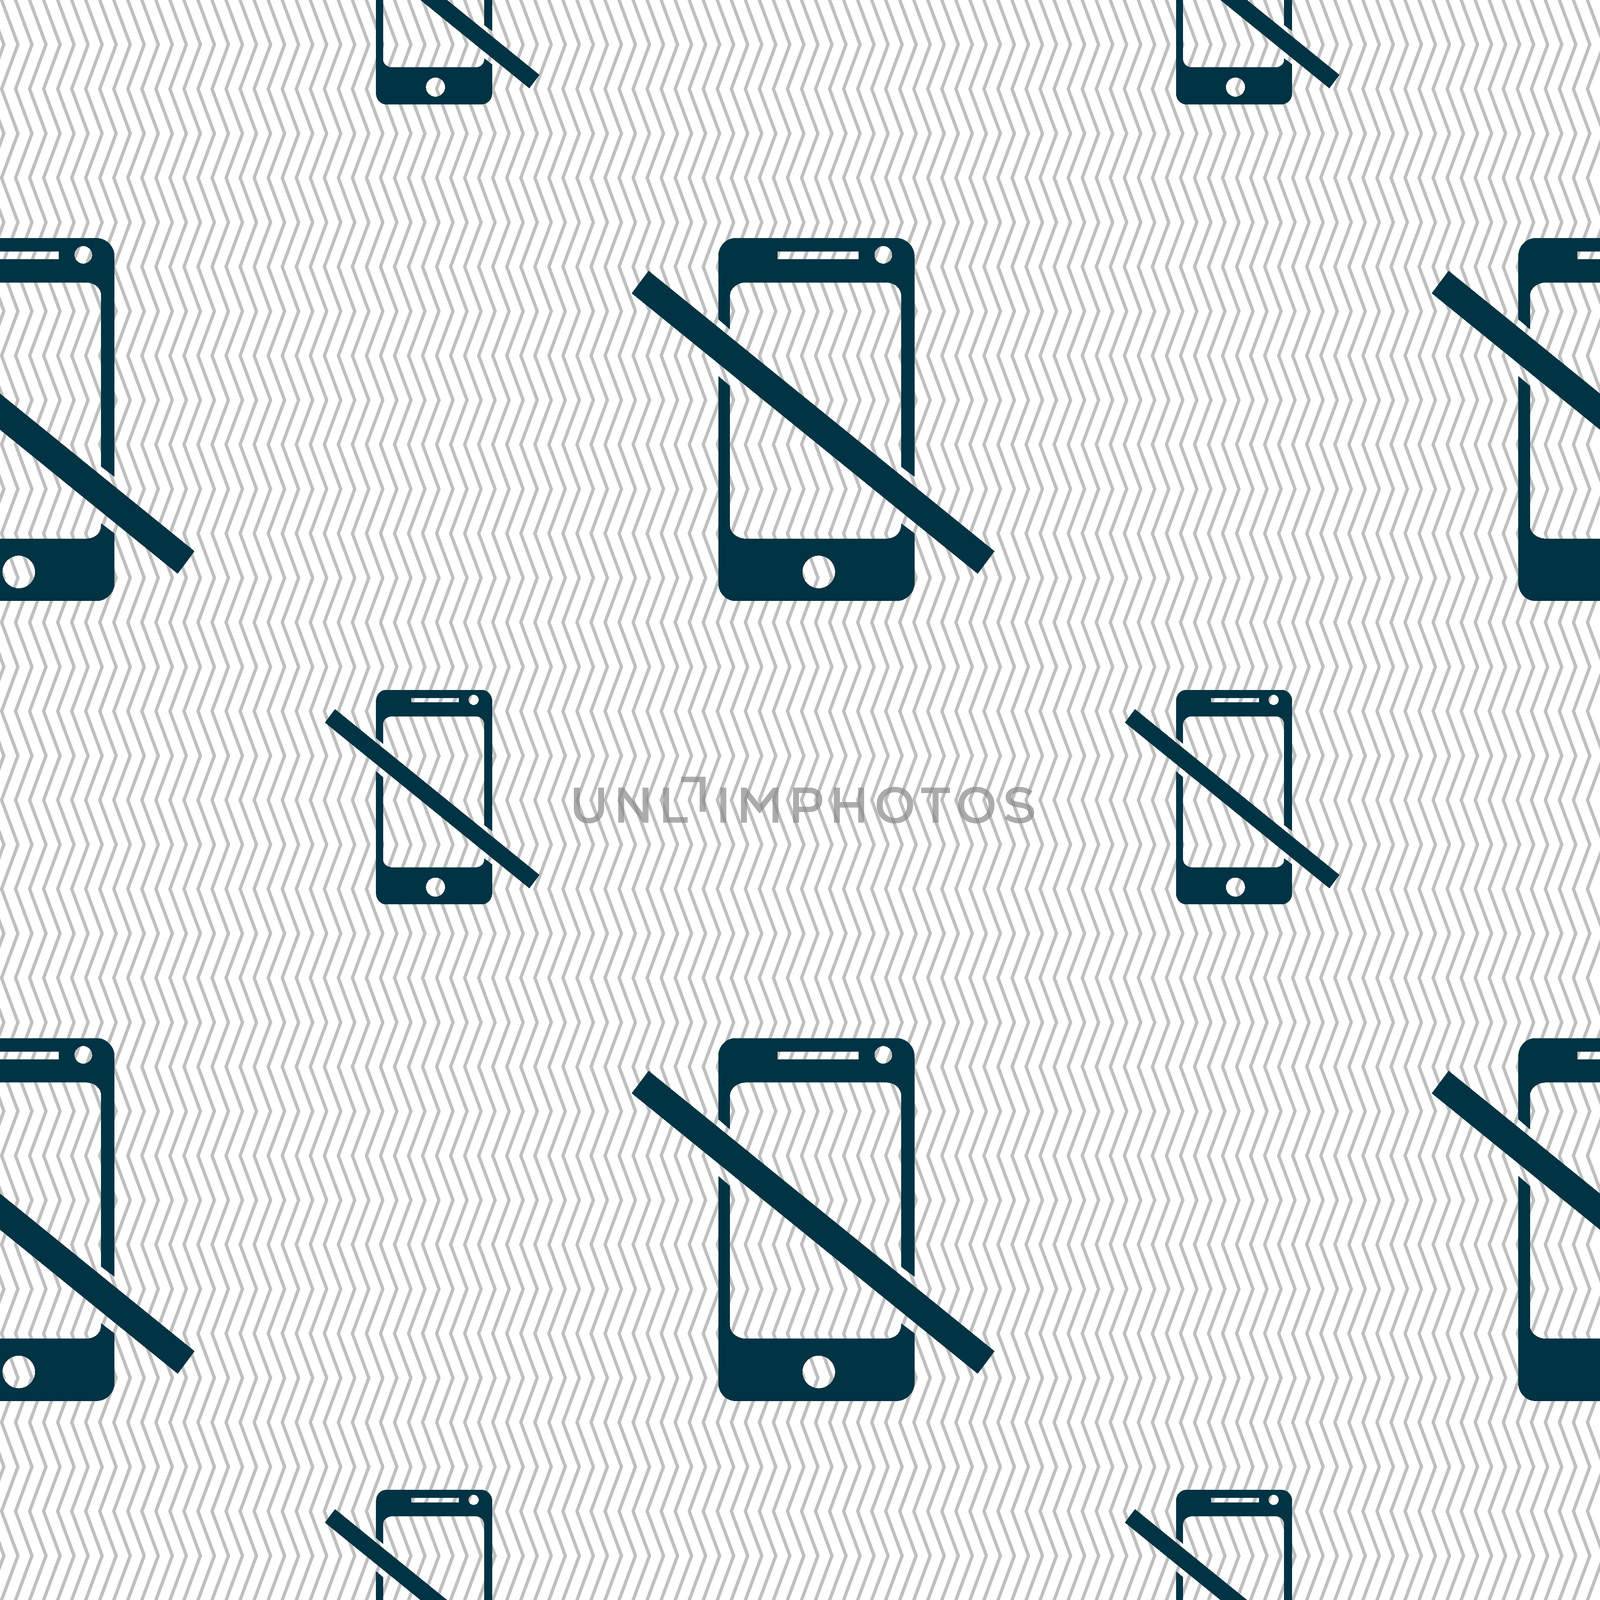 Do not call. Smartphone signs icon. Support symbol. Seamless pattern with geometric texture. illustration